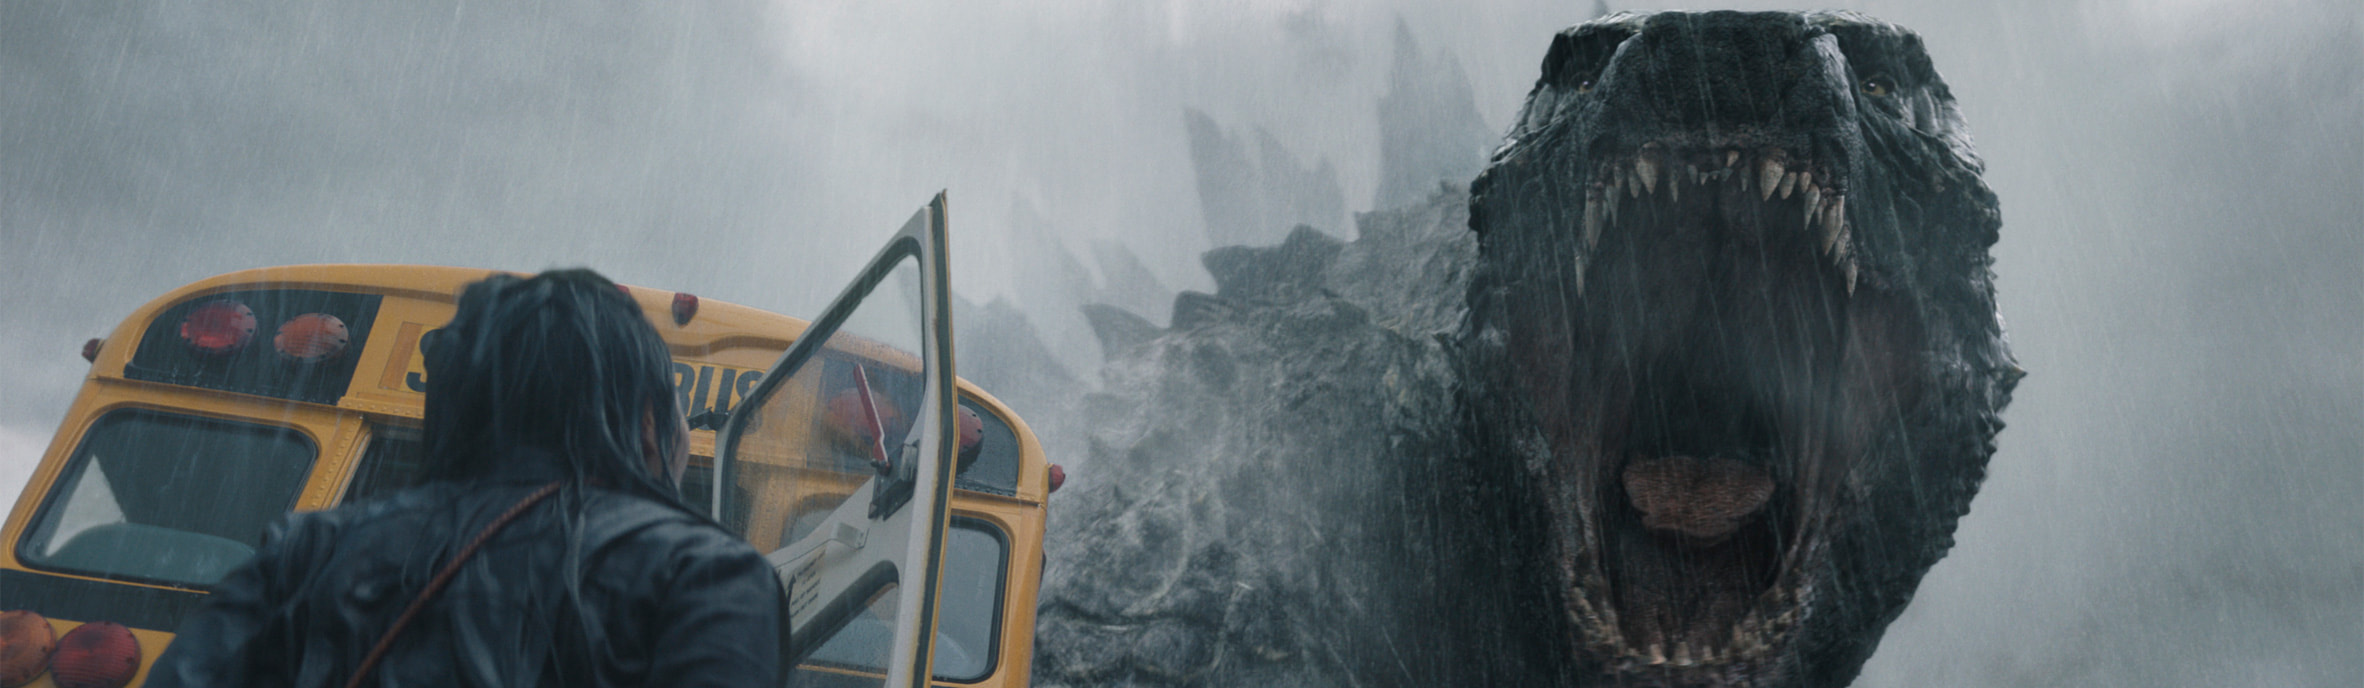 Apple releases new images, info, and title for upcoming Godzilla series